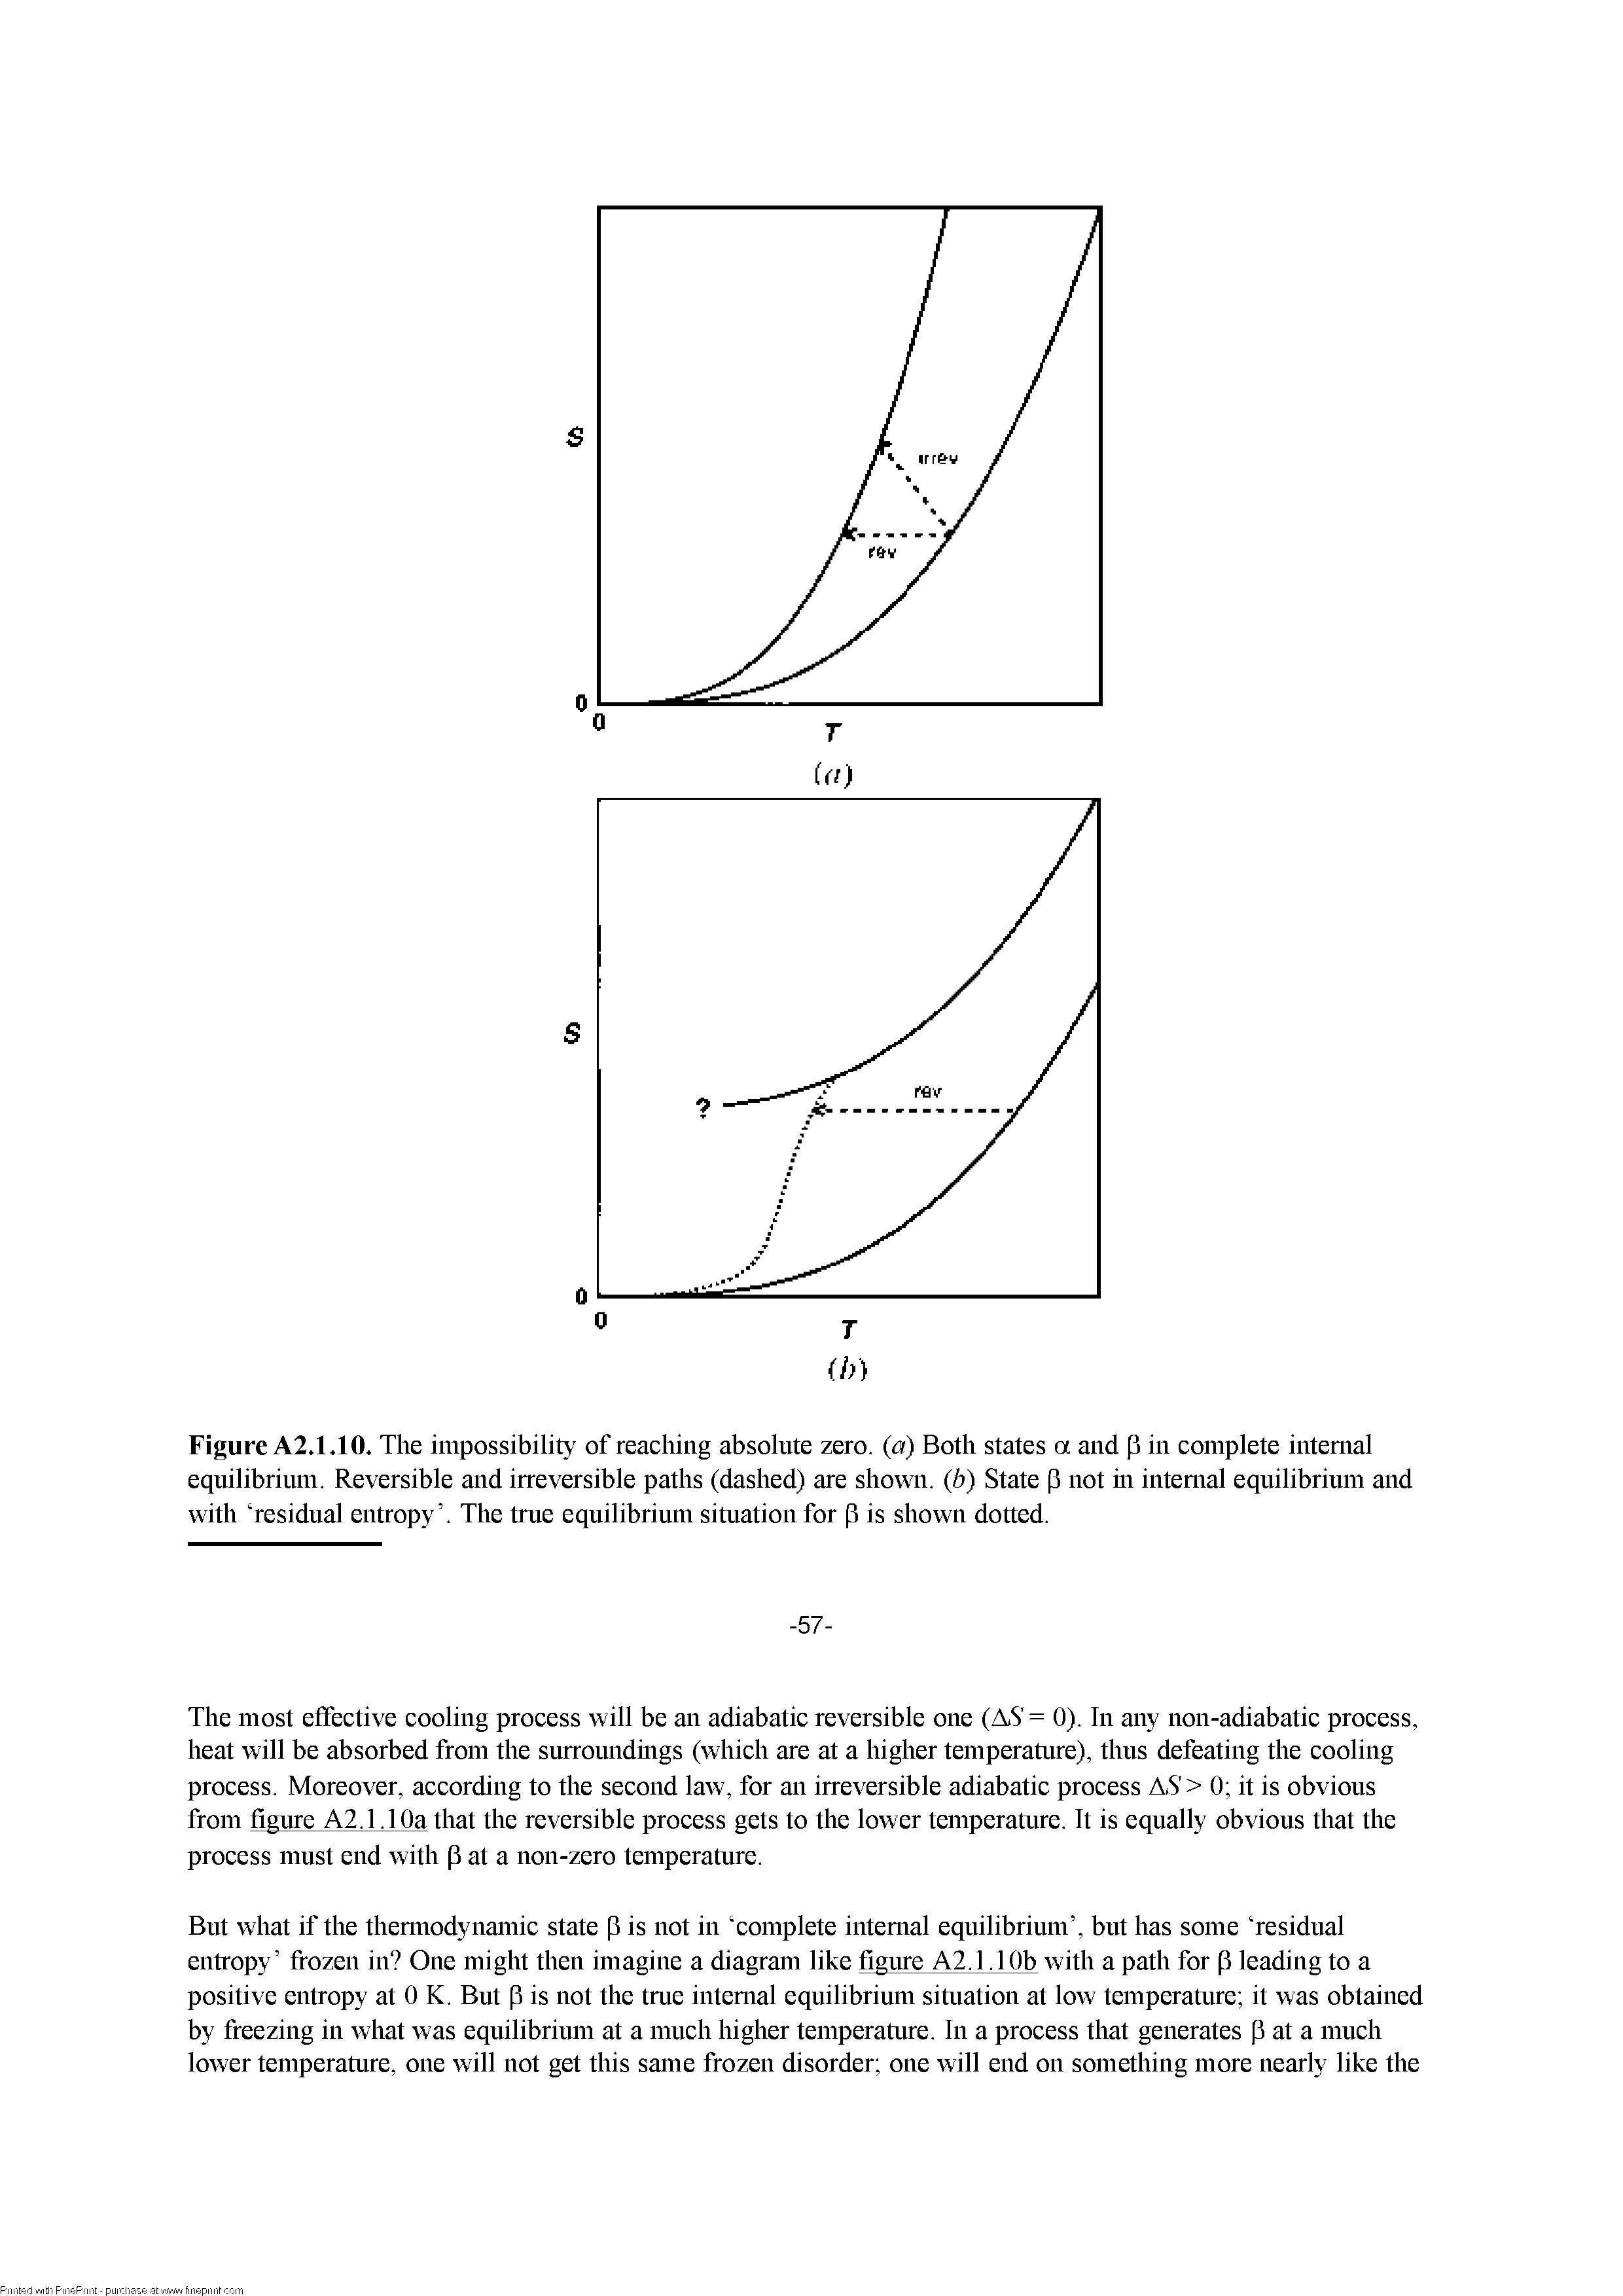 Figure A2.1.10. The impossibility of reaching absolute zero, a) Both states a and p in complete internal equilibrium. Reversible and irreversible paths (dashed) are shown, b) State P not m internal equilibrium and with residual entropy . The true equilibrium situation for p is shown dotted.